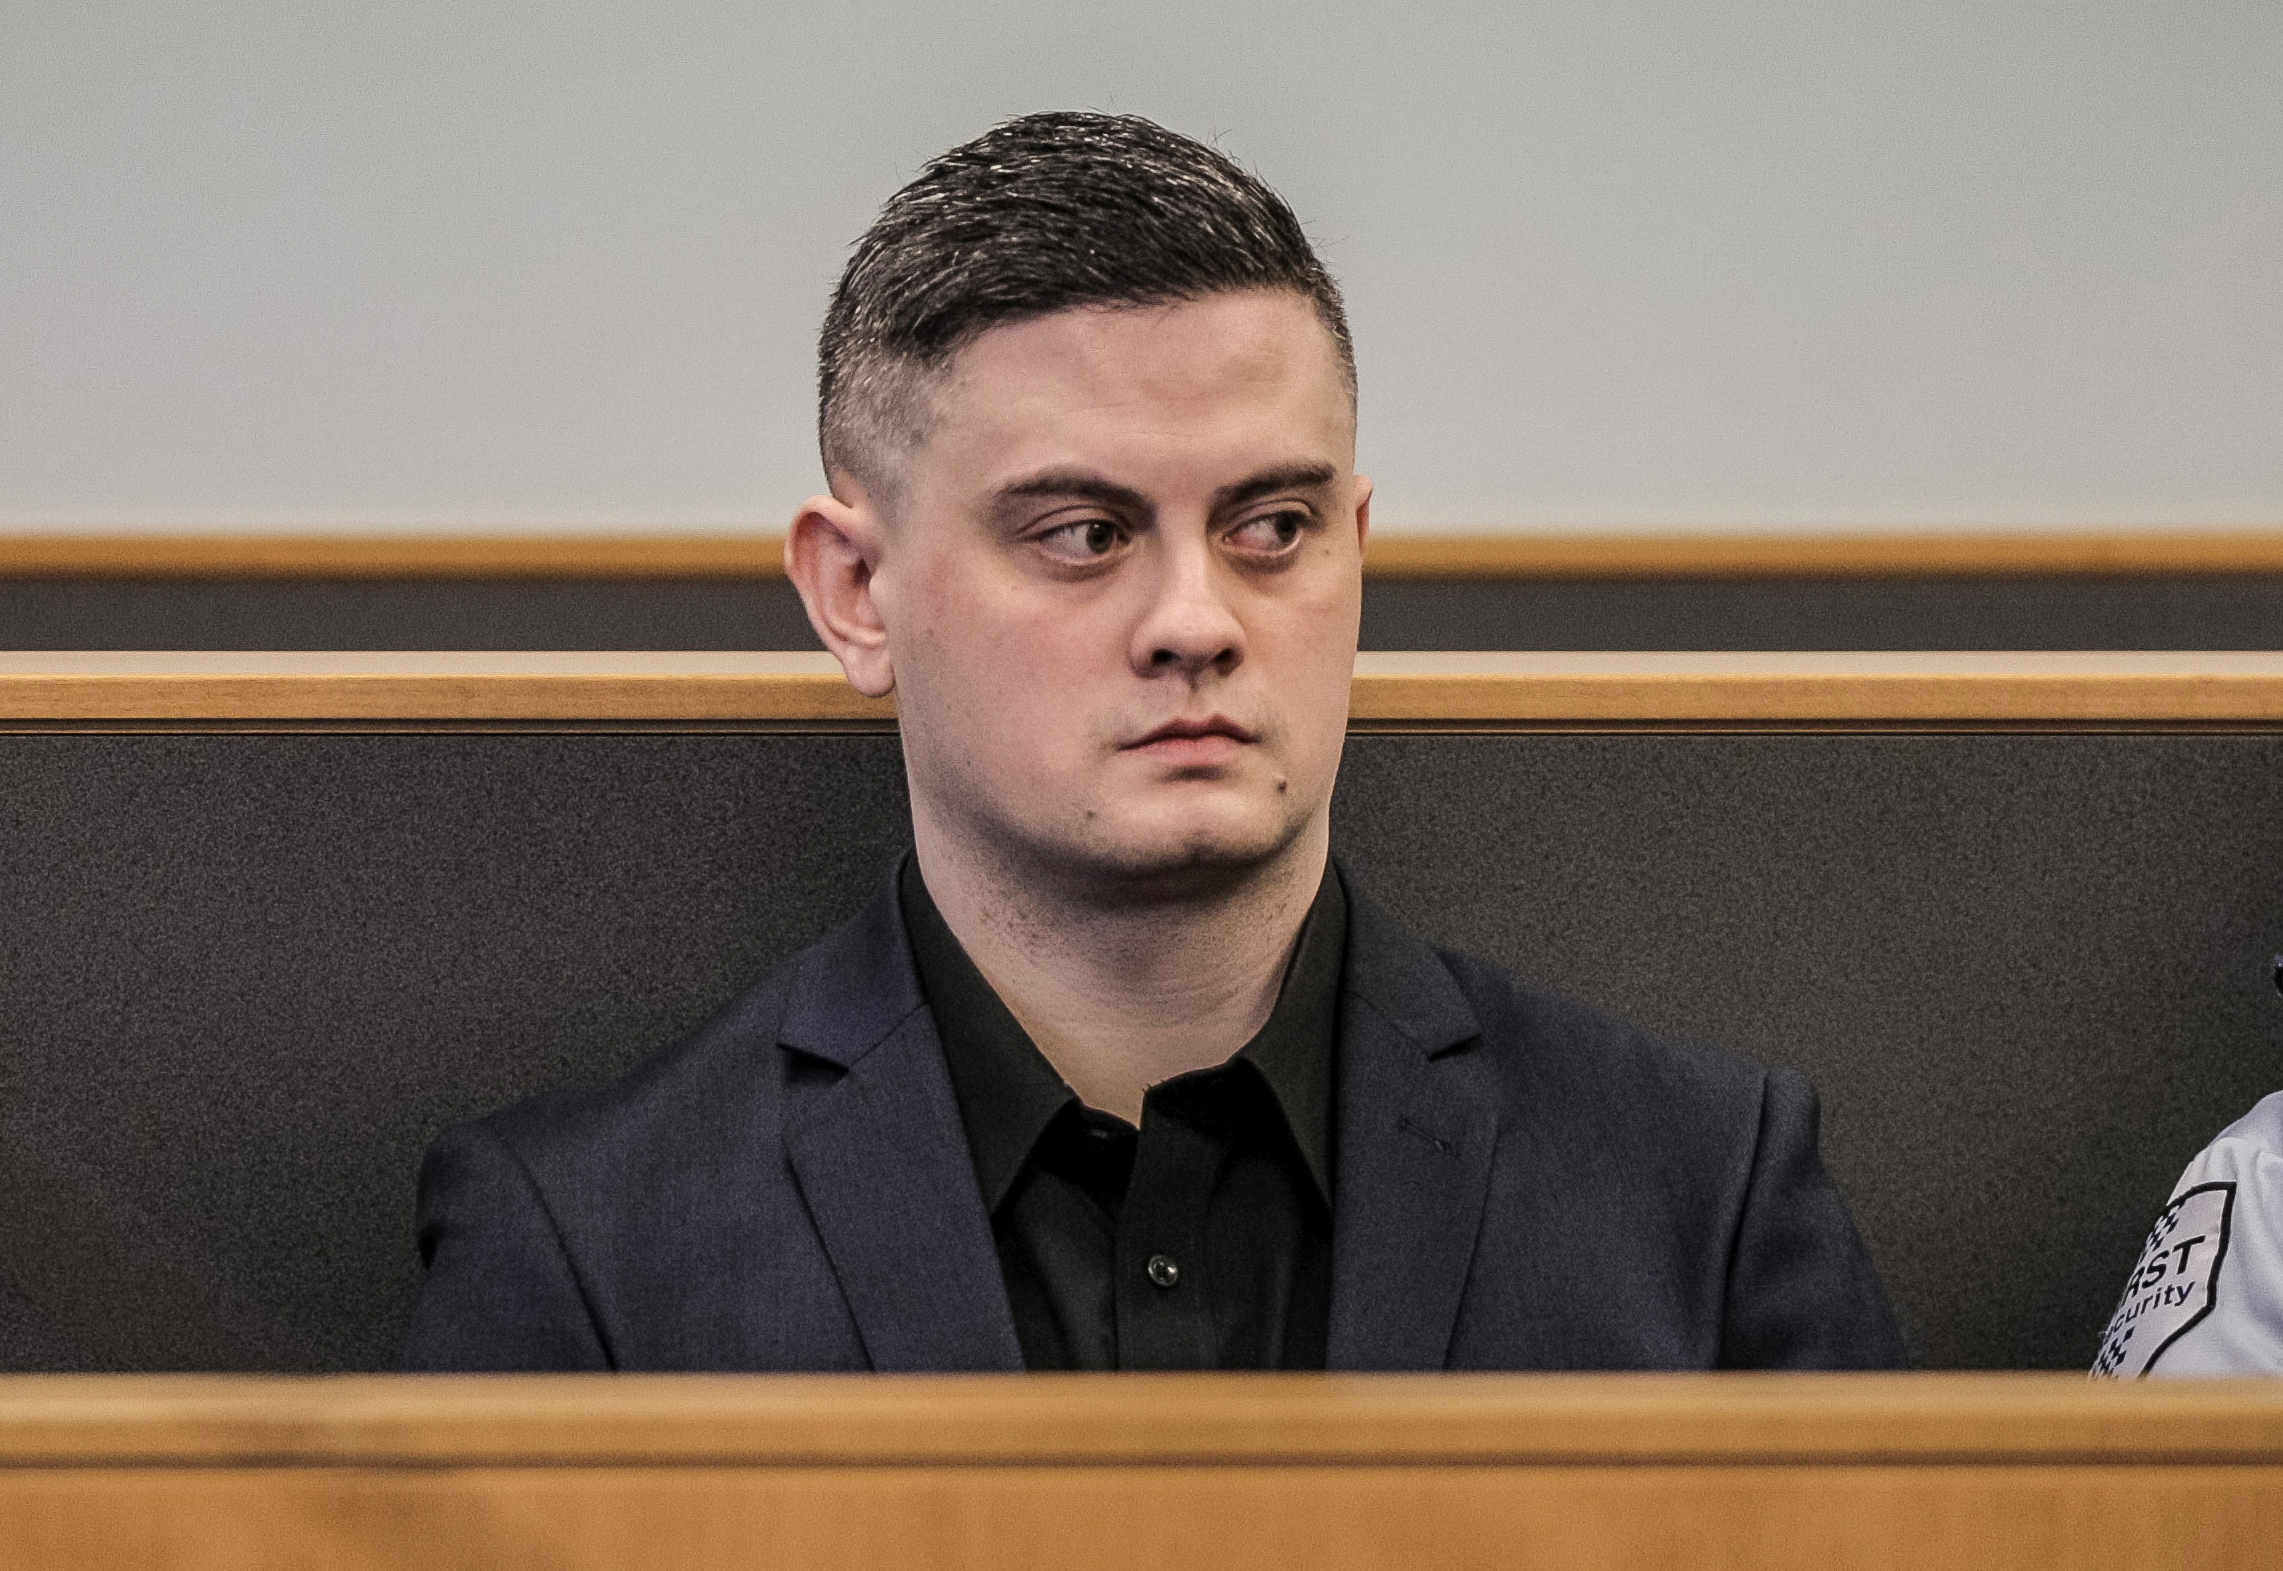 Jesse Shane Kempson sits in New Zealand's High Court during the trial for the murder of British backpacker Grace Millane